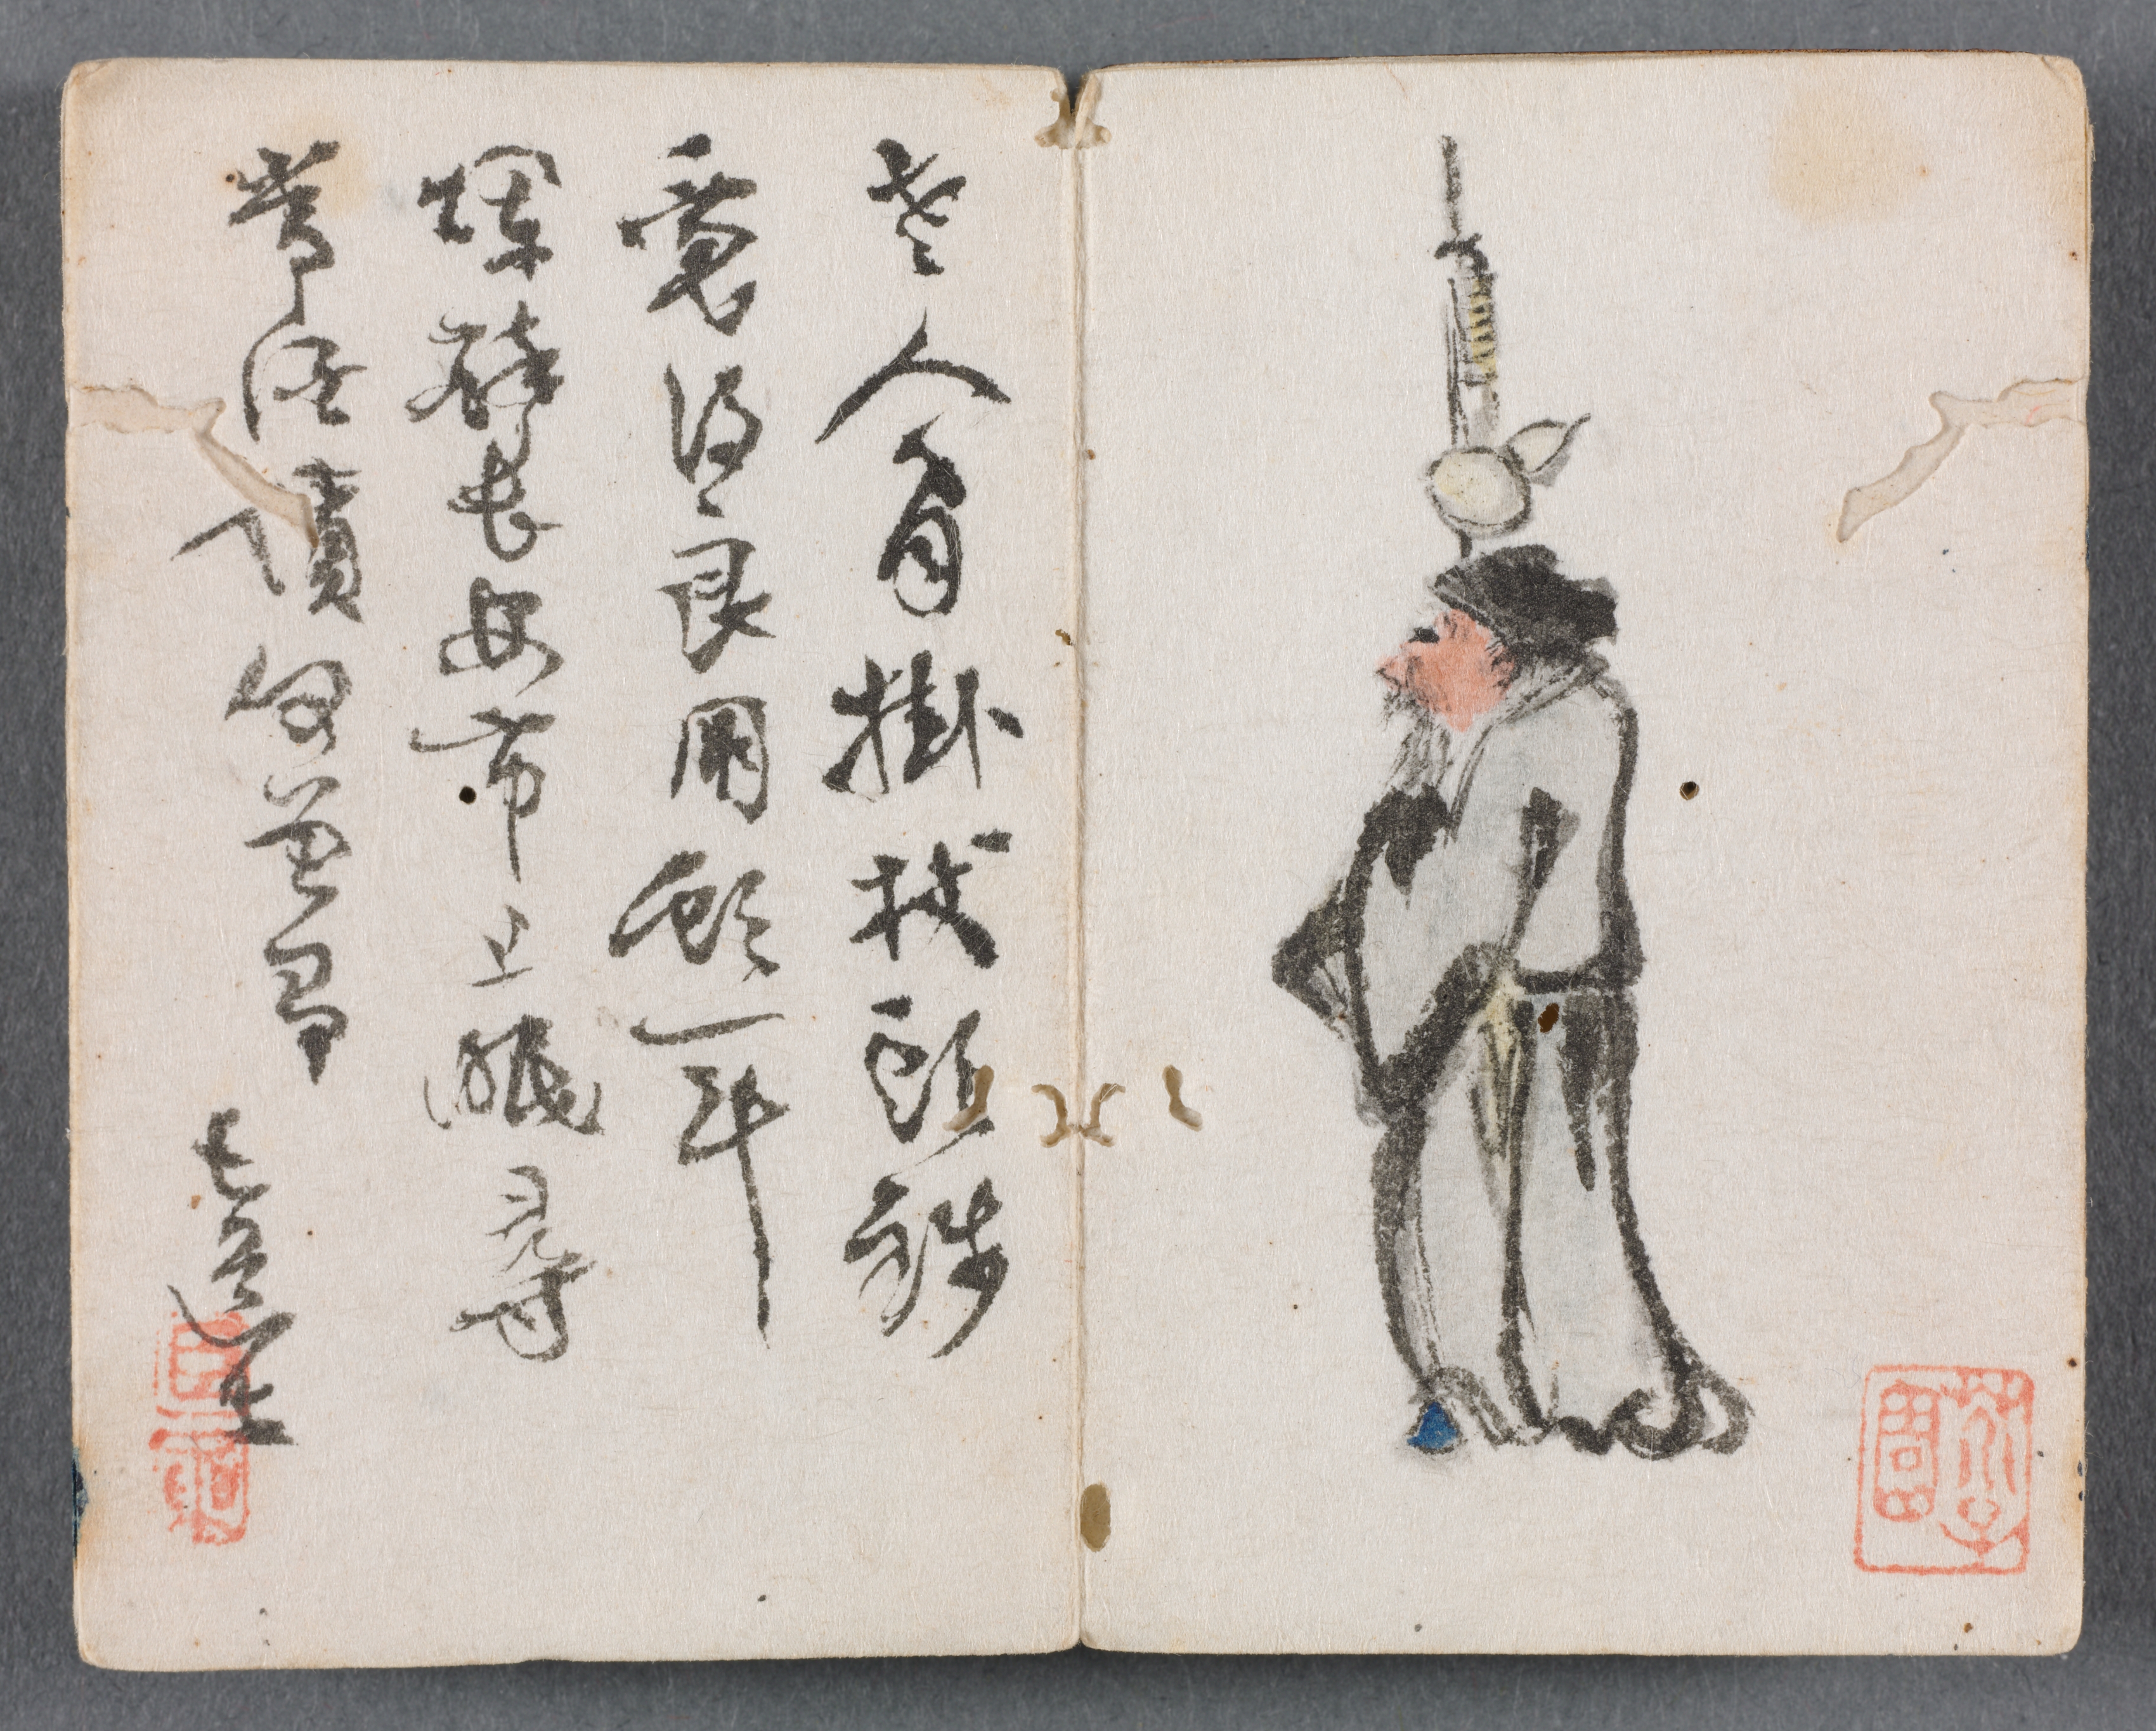 Miniature Album with Figures and Landscape (Man with Staff)